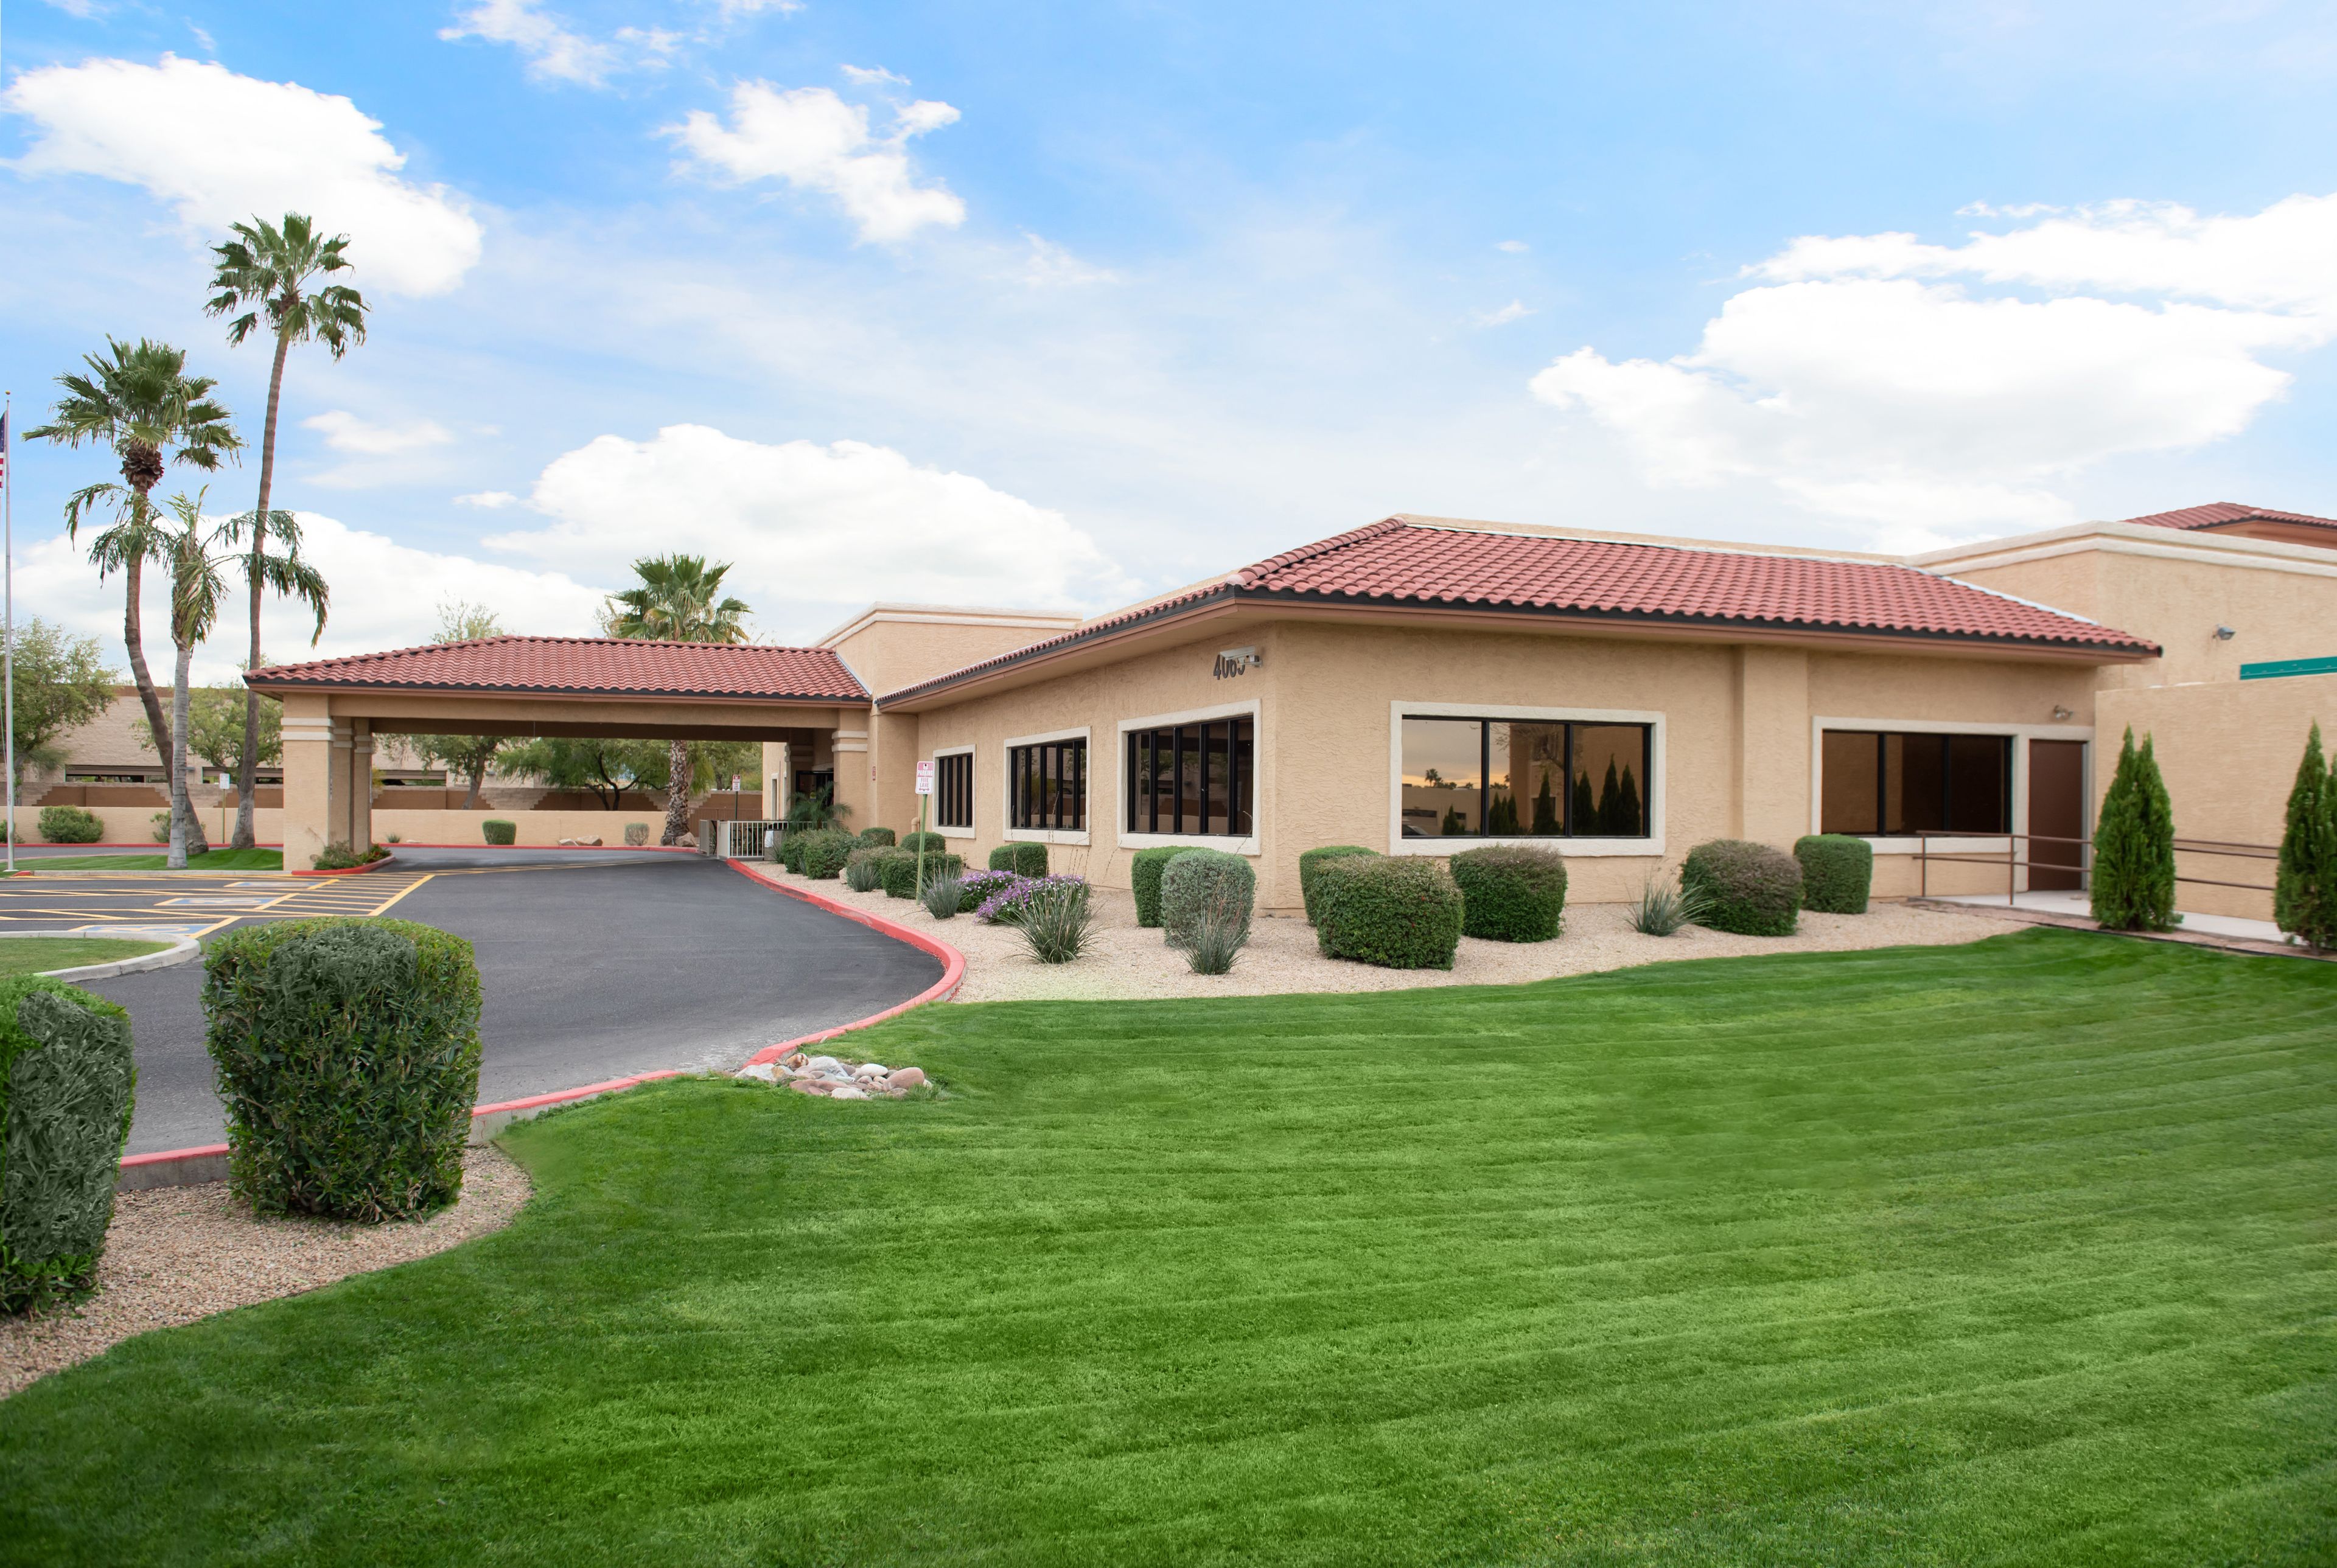 Life Care Center Of Paradise Valley 4